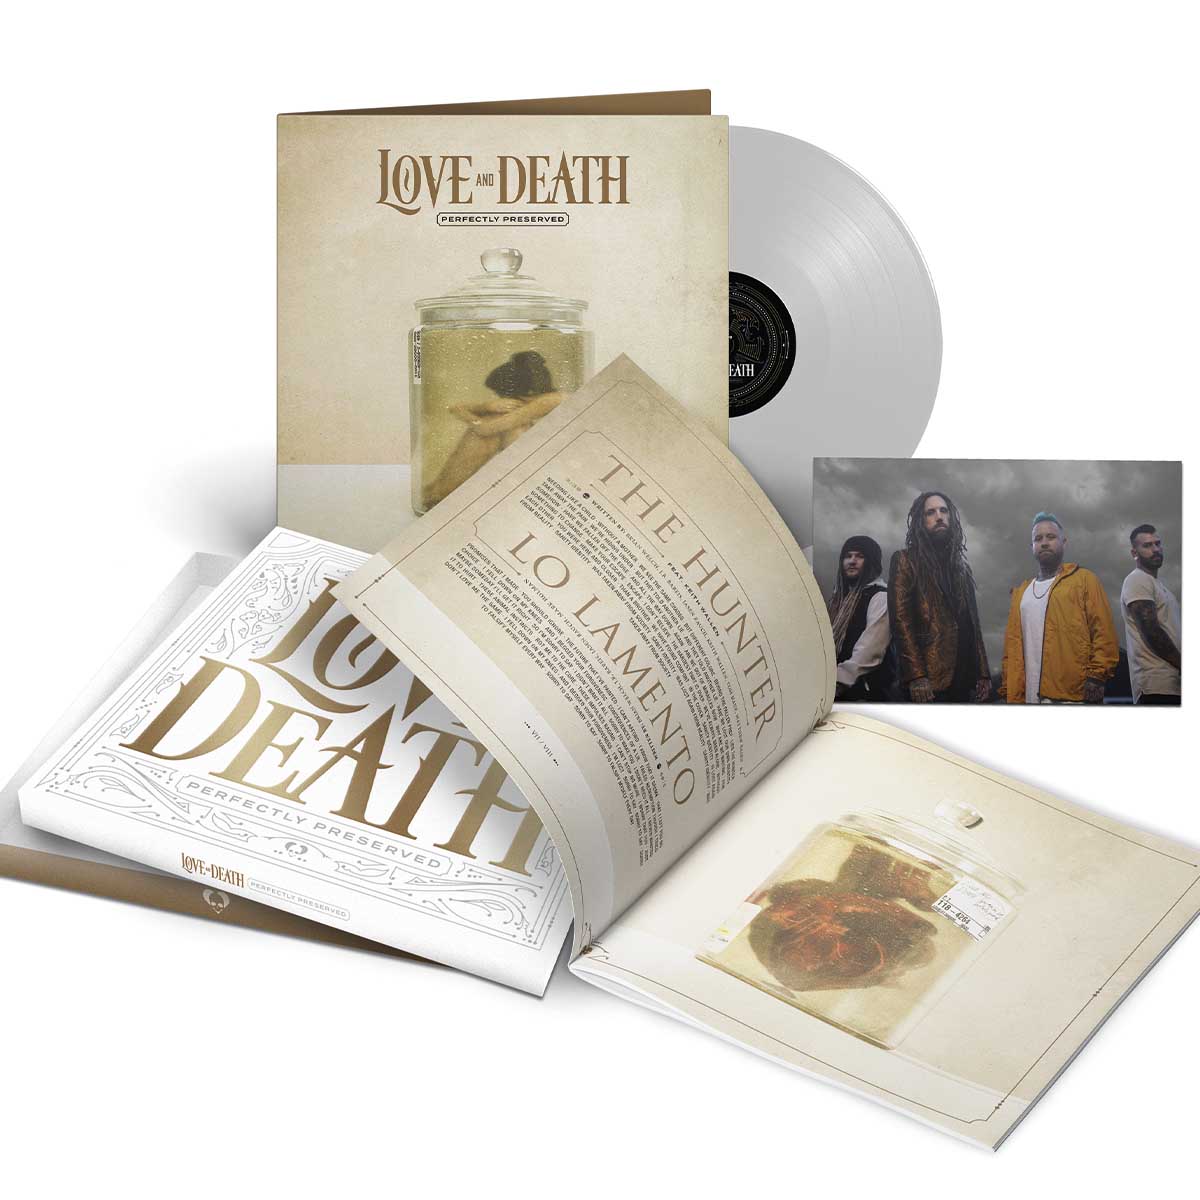 Love And Death "Perfectly Preserved" Deluxe Signed Crystal Clear Vinyl Box Set